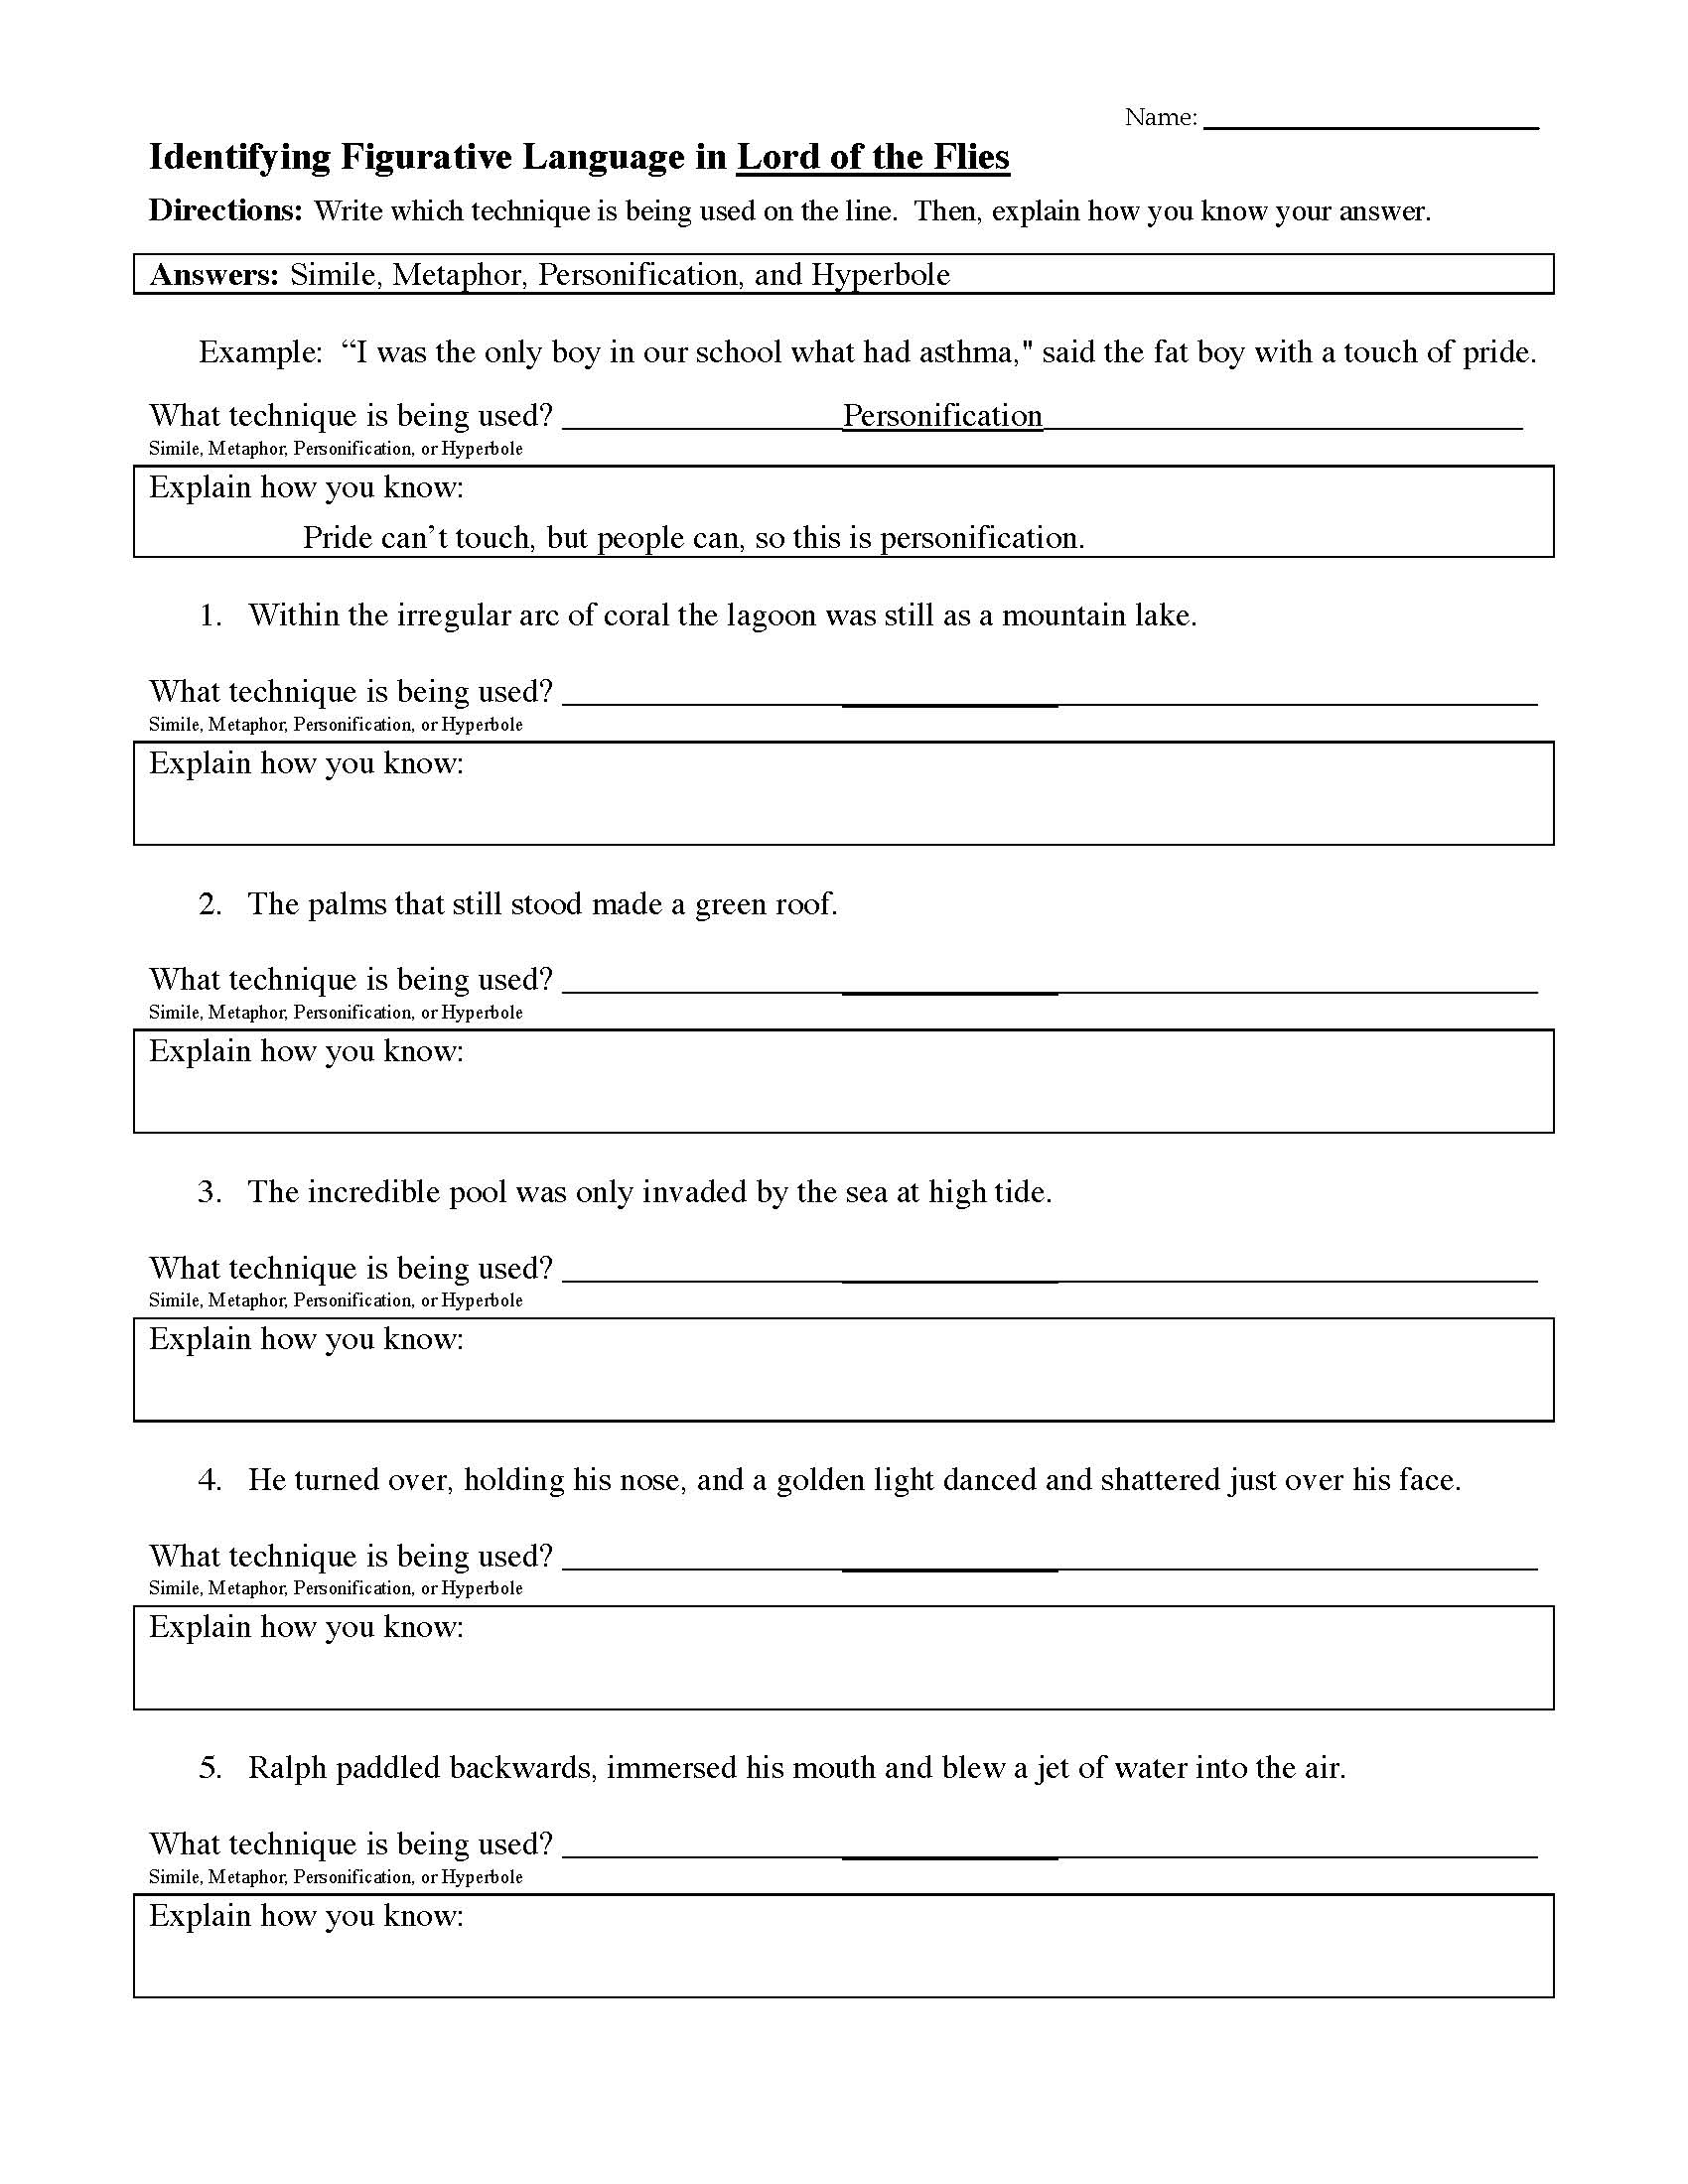 This is a preview image of "Lord of the Flies" Figurative Language Worksheet. Click on it to enlarge it or view the source file.